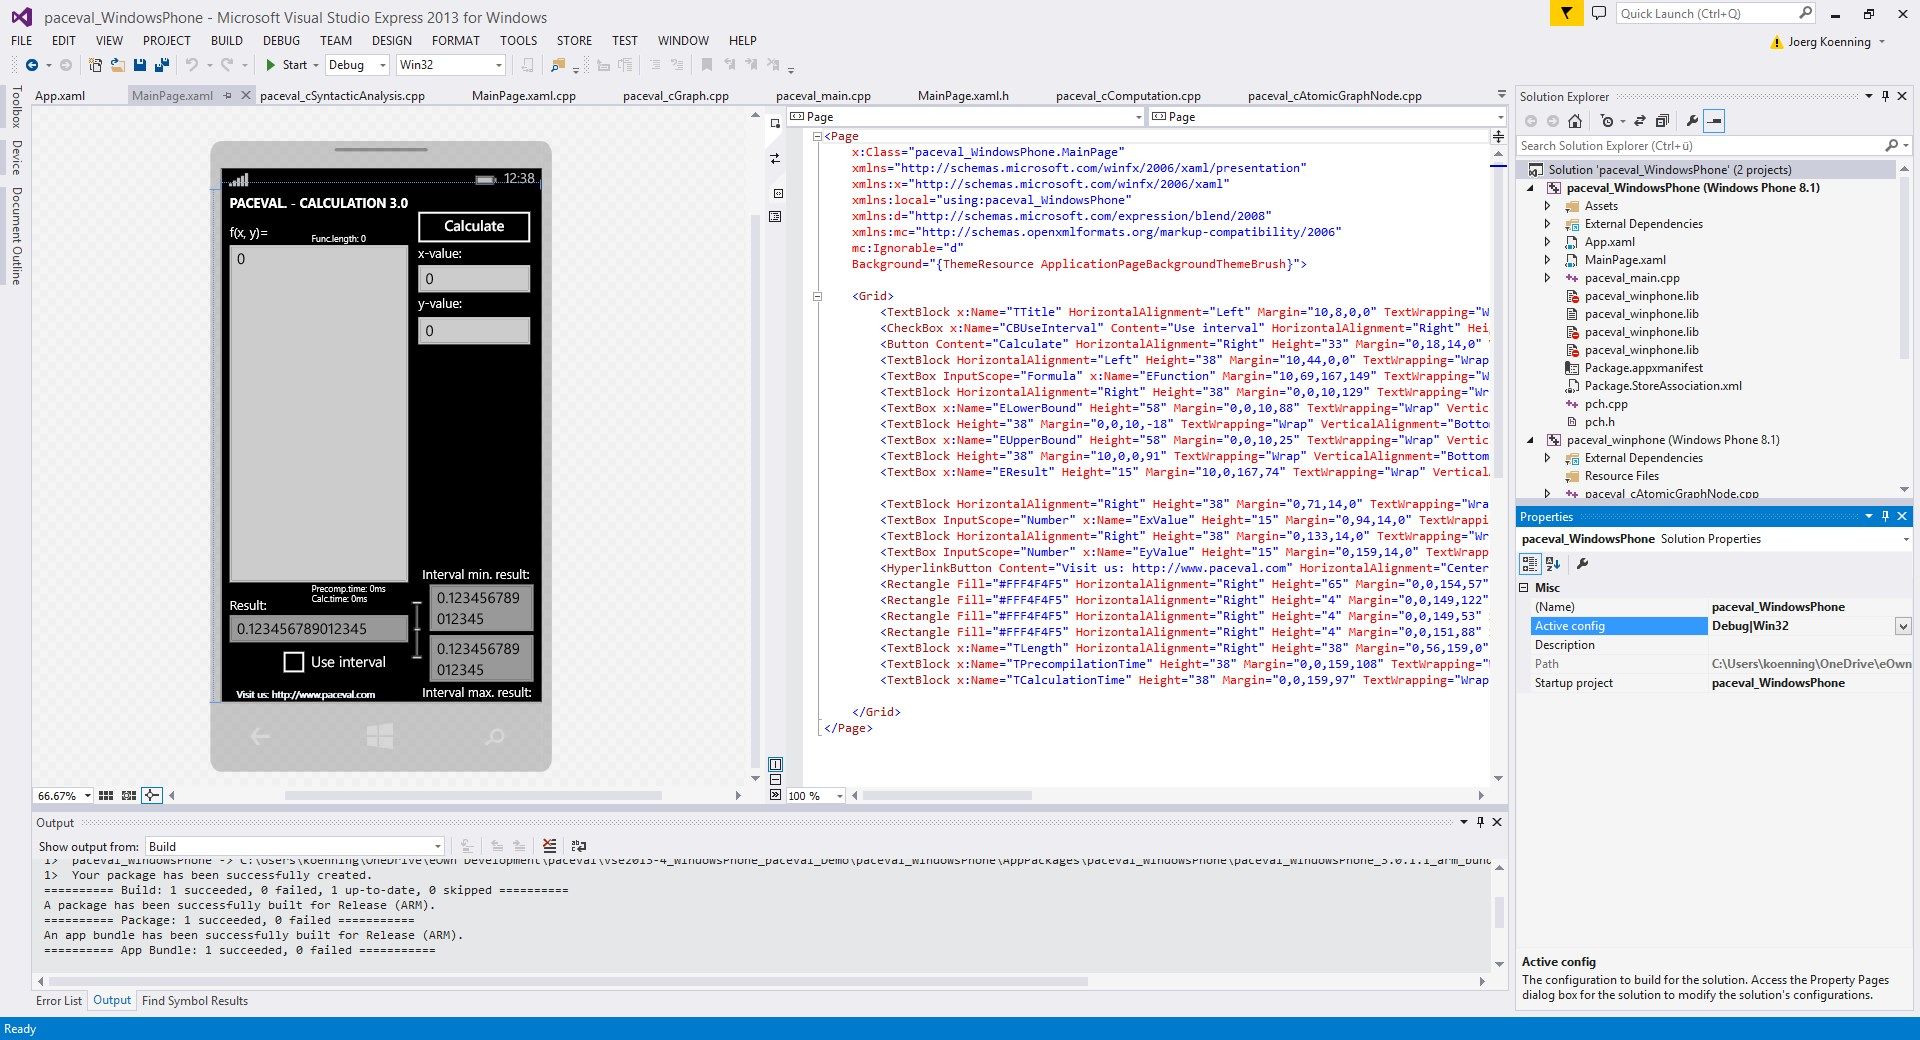 This is the example opened in Visual C++ which is included in the paceval. SDK. See also our page Demo download http://paceval.com/product-demo